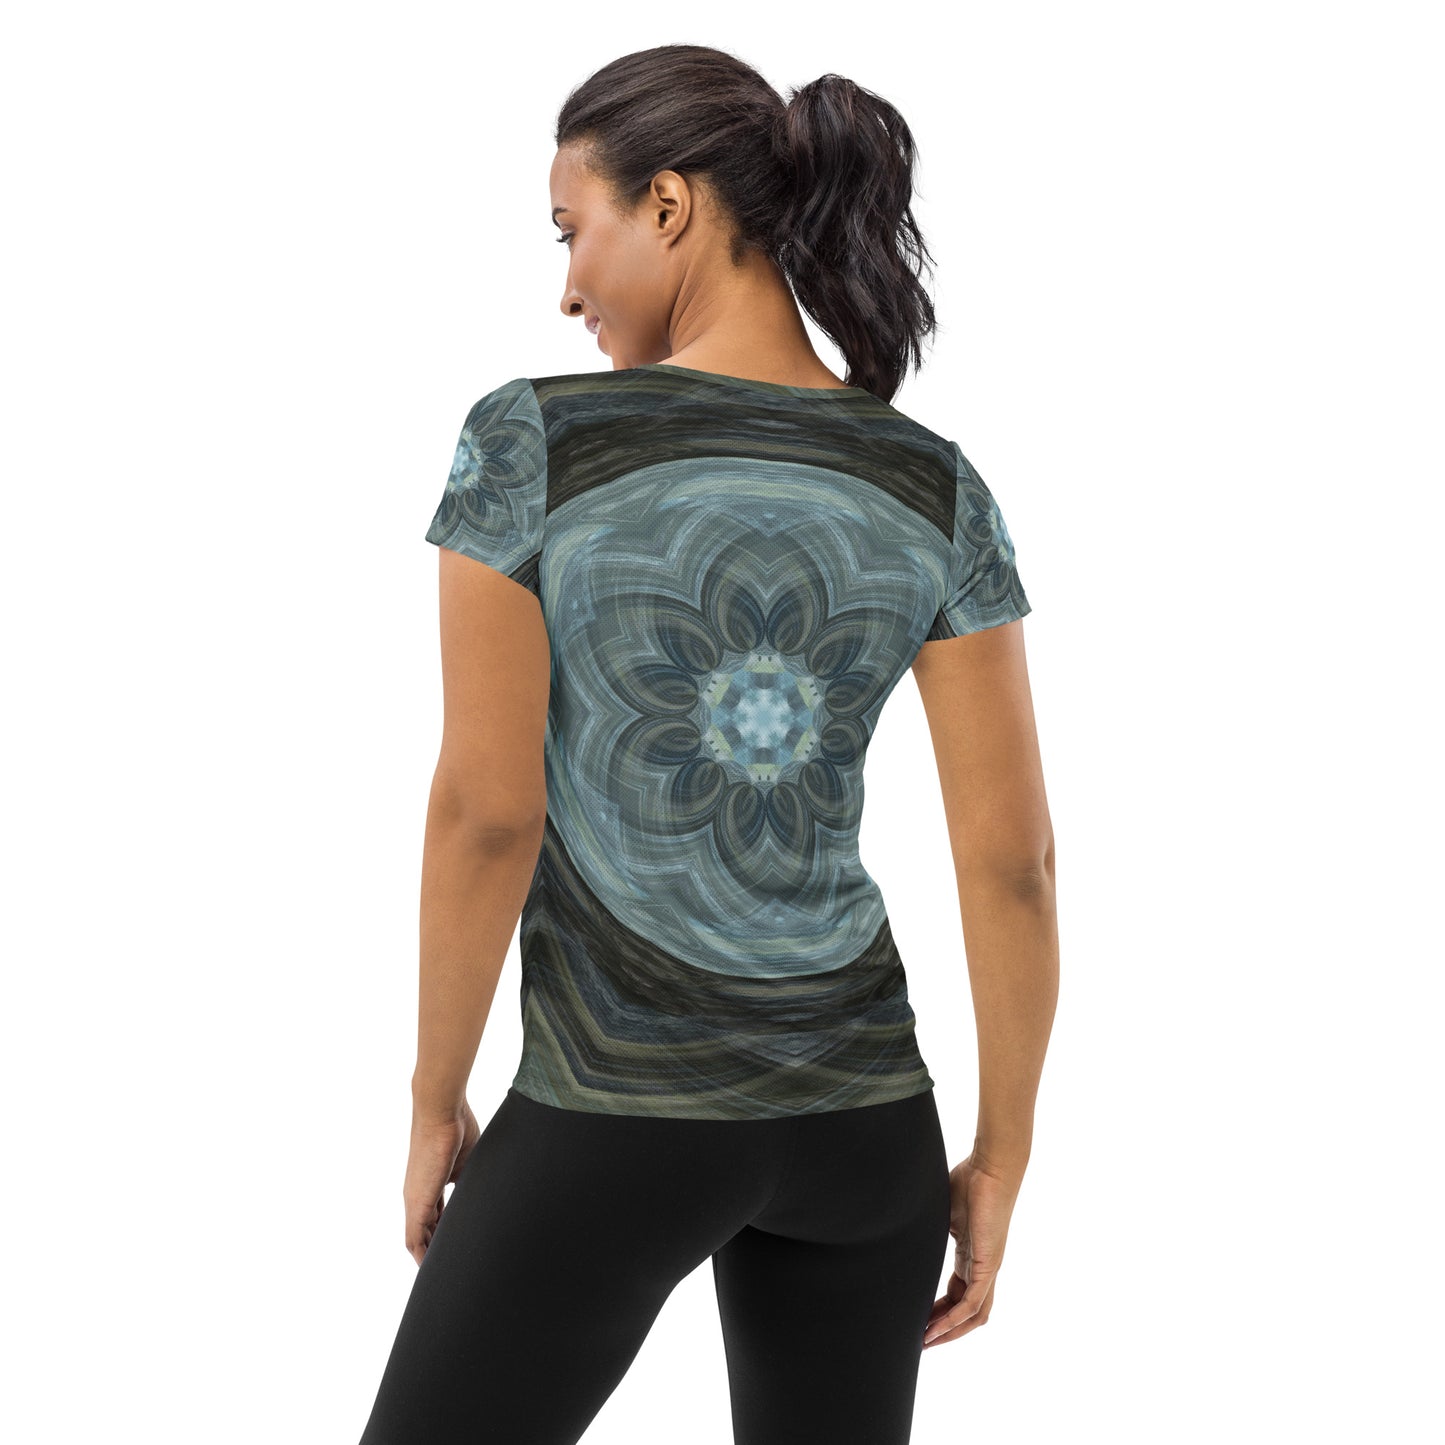 All-Over Print Women's Athletic T-shirt